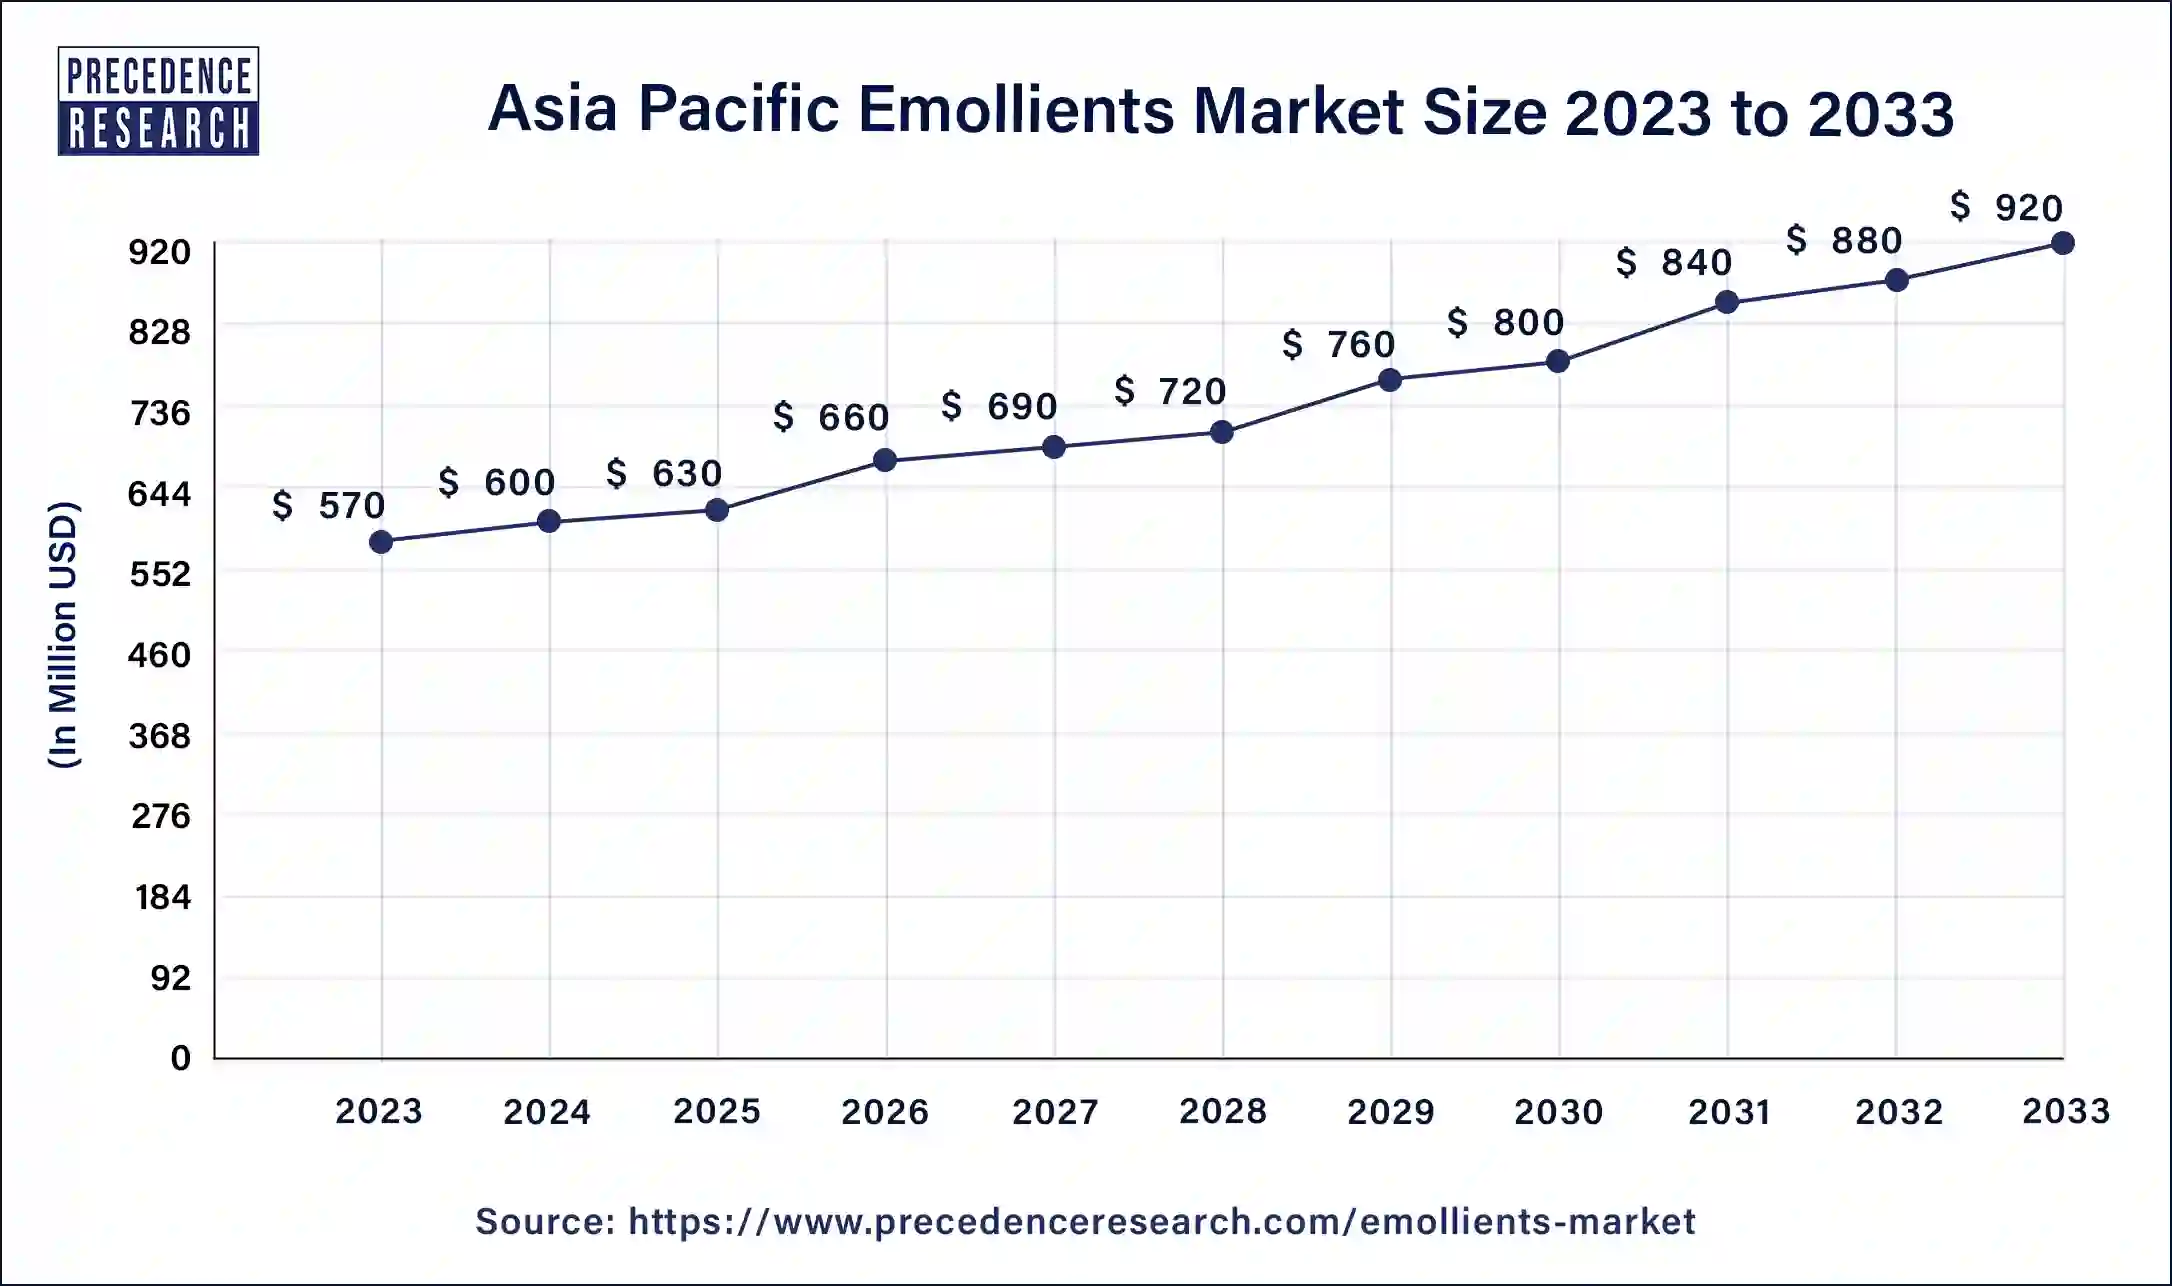 Asia Pacific Emollients Market Size 2024 to 2033